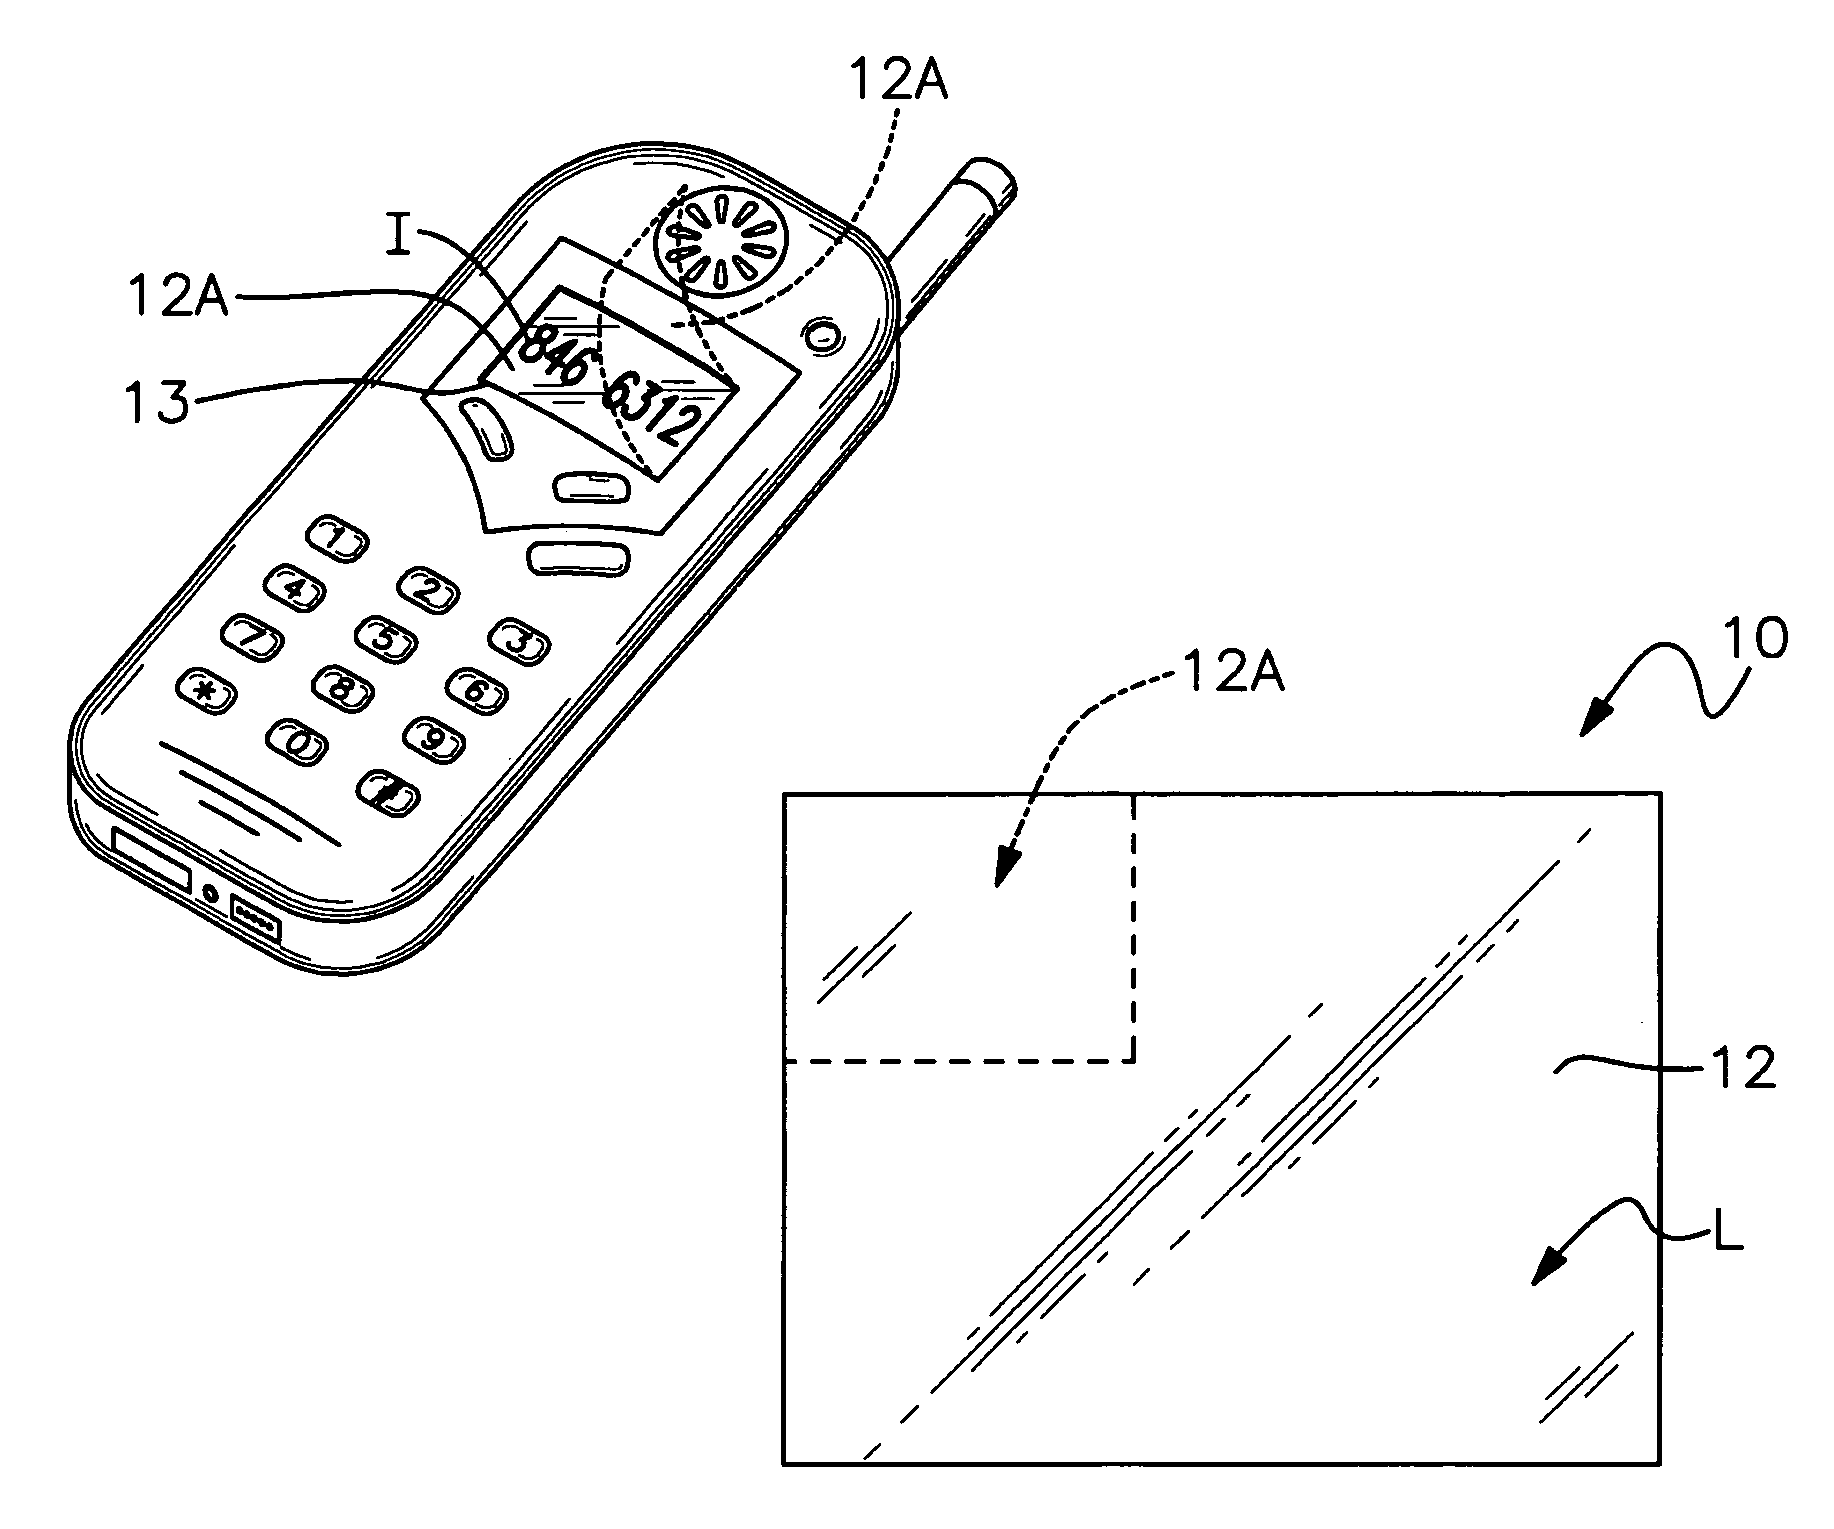 Display screen magnifying device